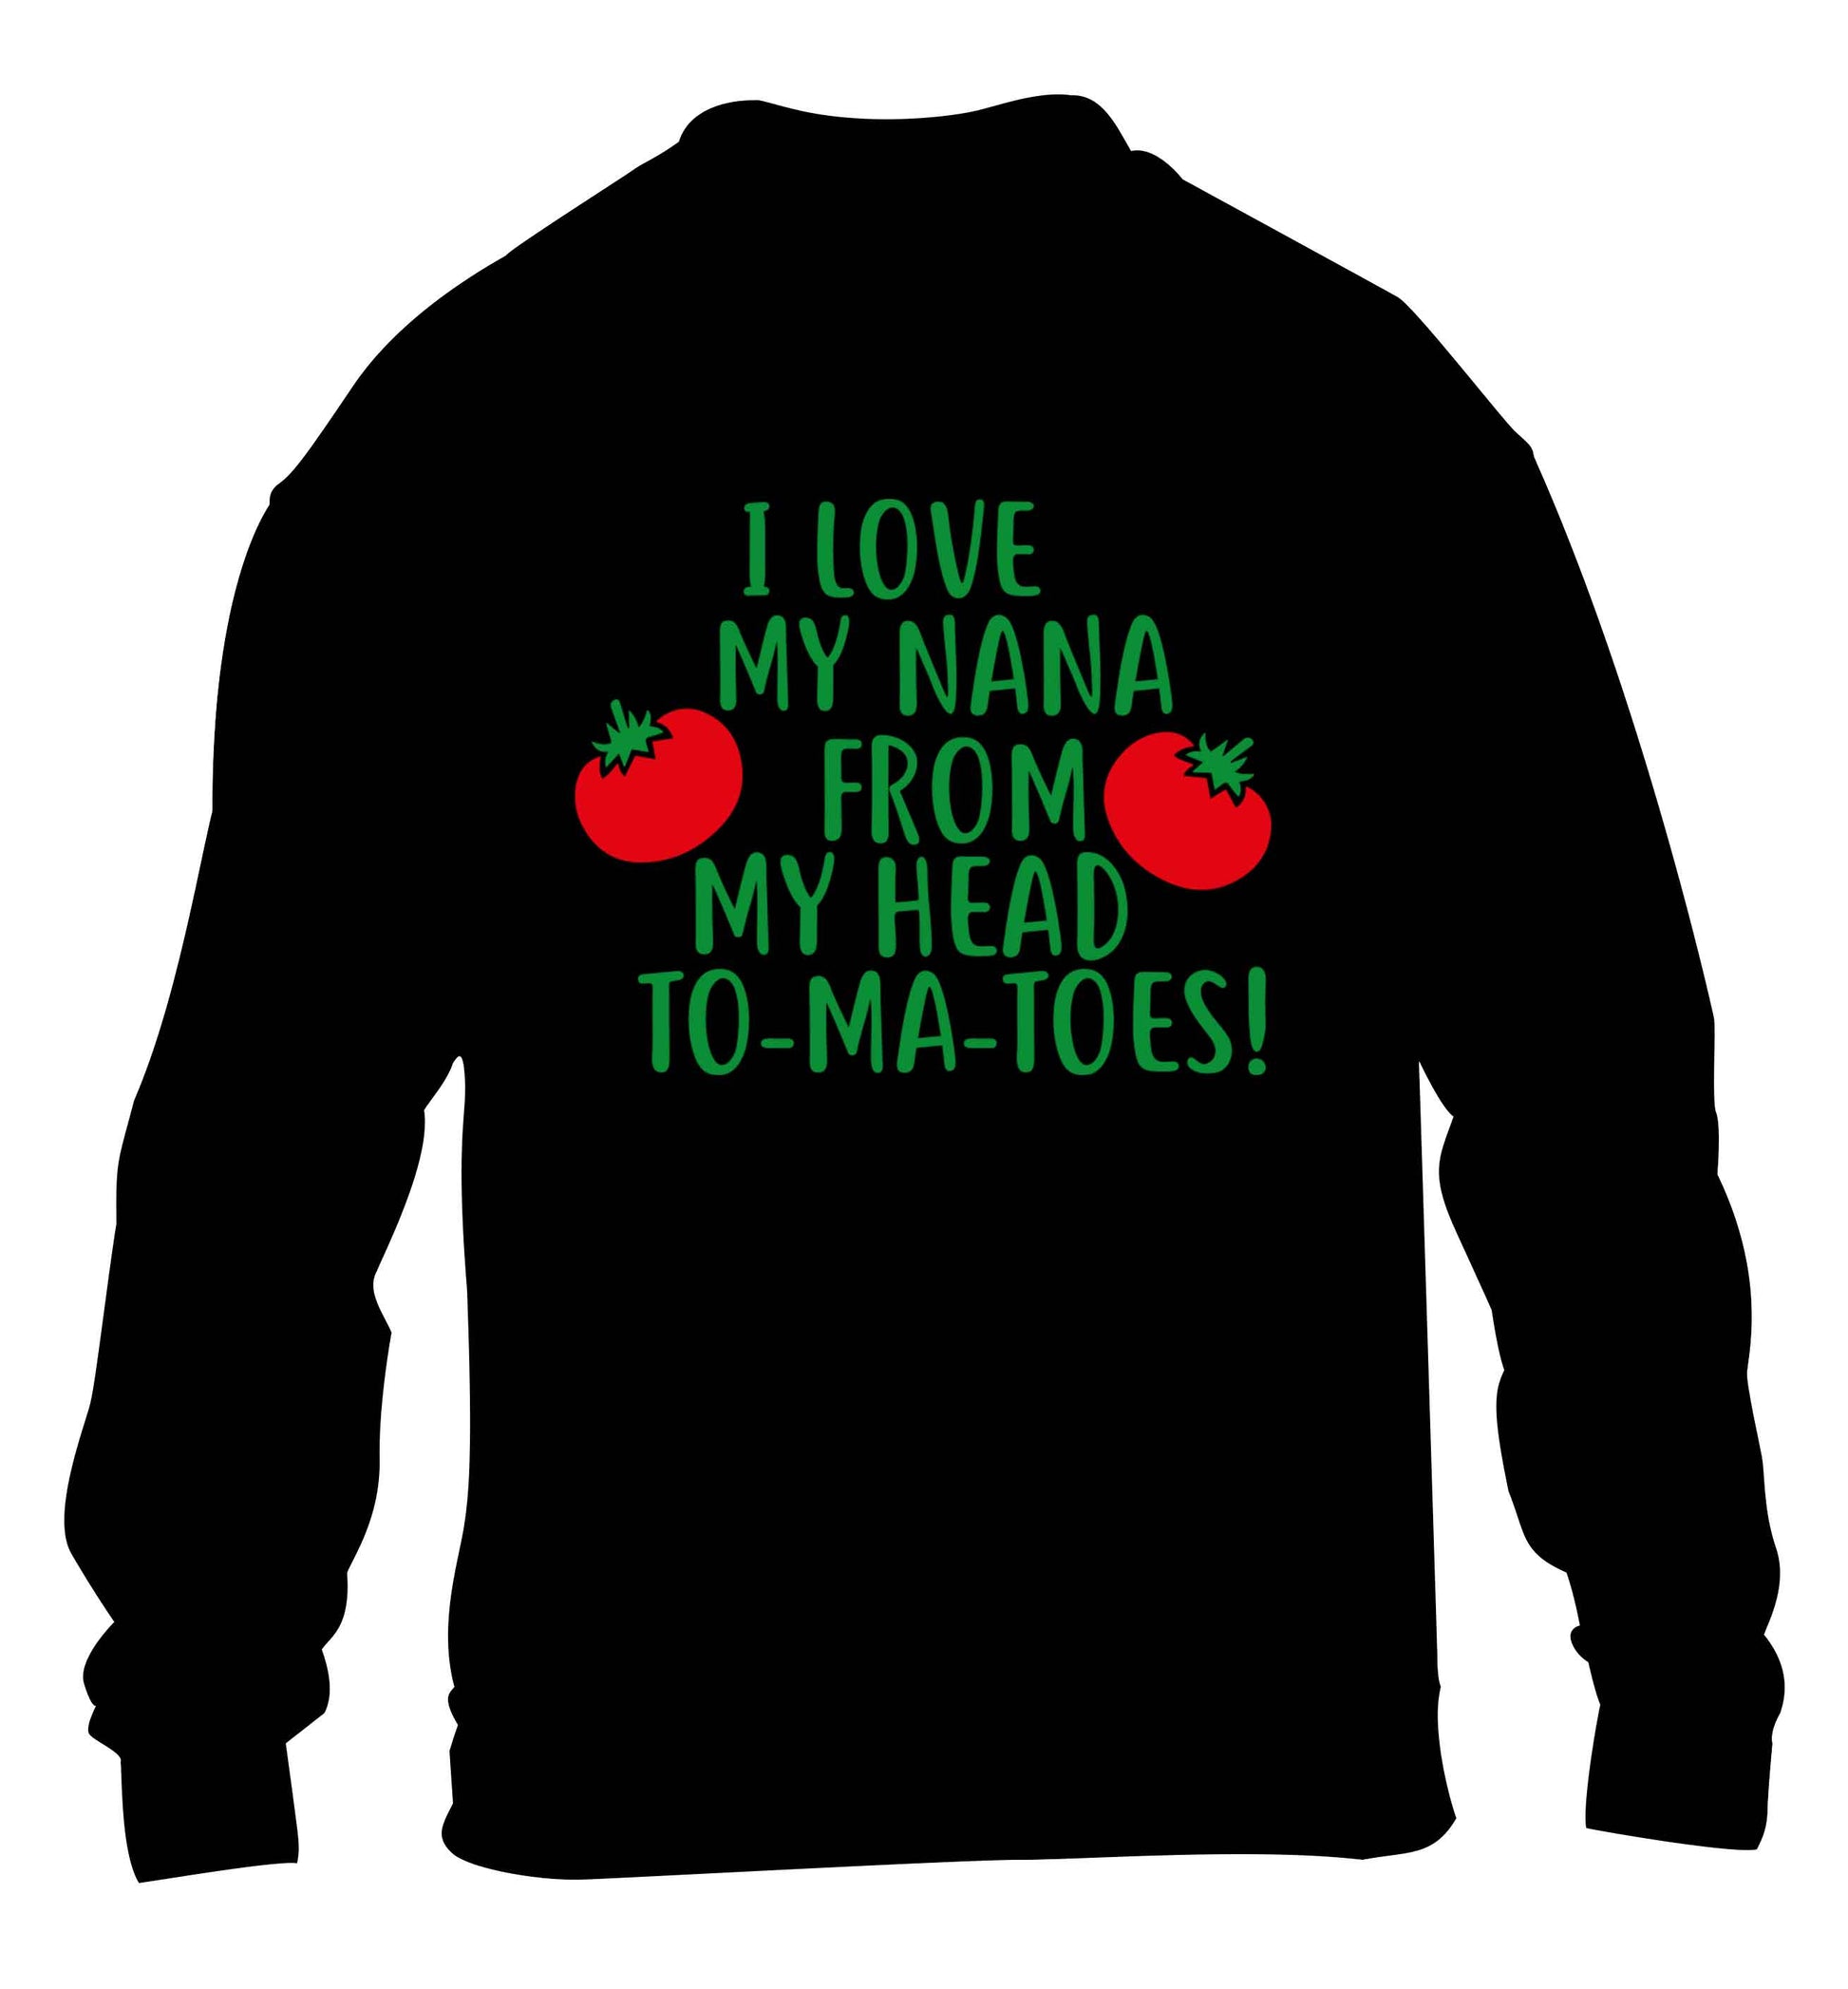 I love my nana from my head to-ma-toes children's black sweater 12-13 Years